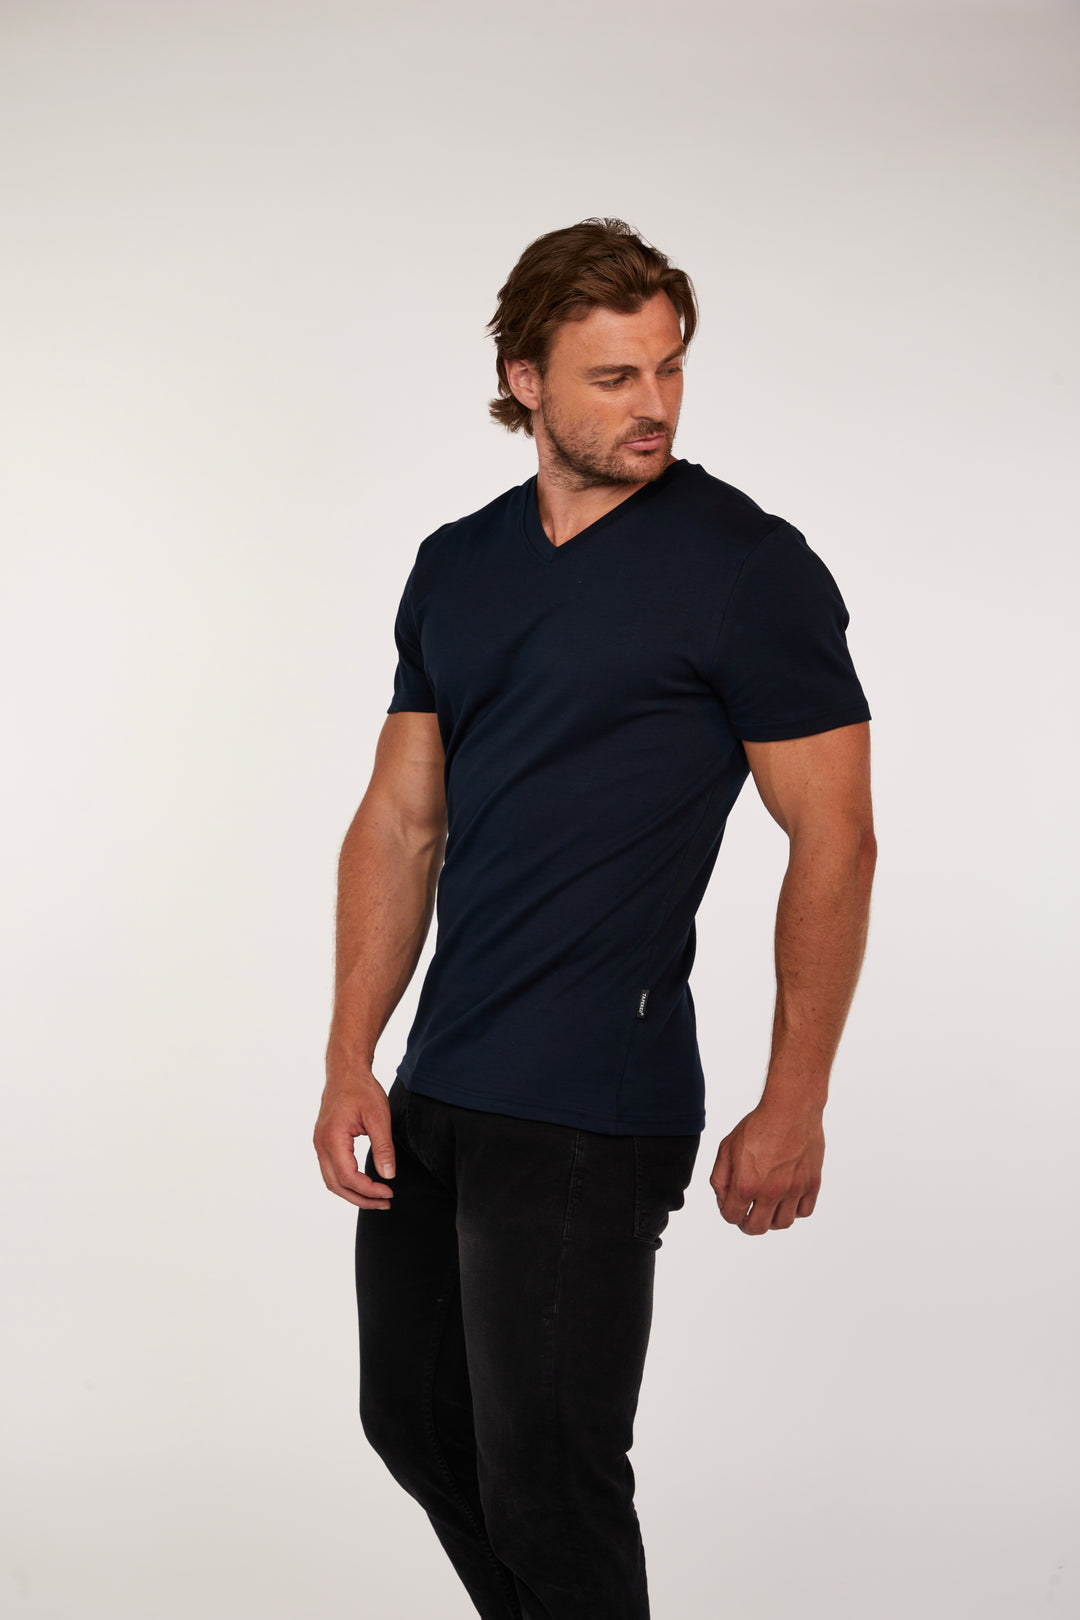 Navy Muscle Fit V-Neck T-Shirt in Short Sleeve. A Proportionally Fitted and Muscle Fit V Neck. The best v neck t-shirt for muscular guys.